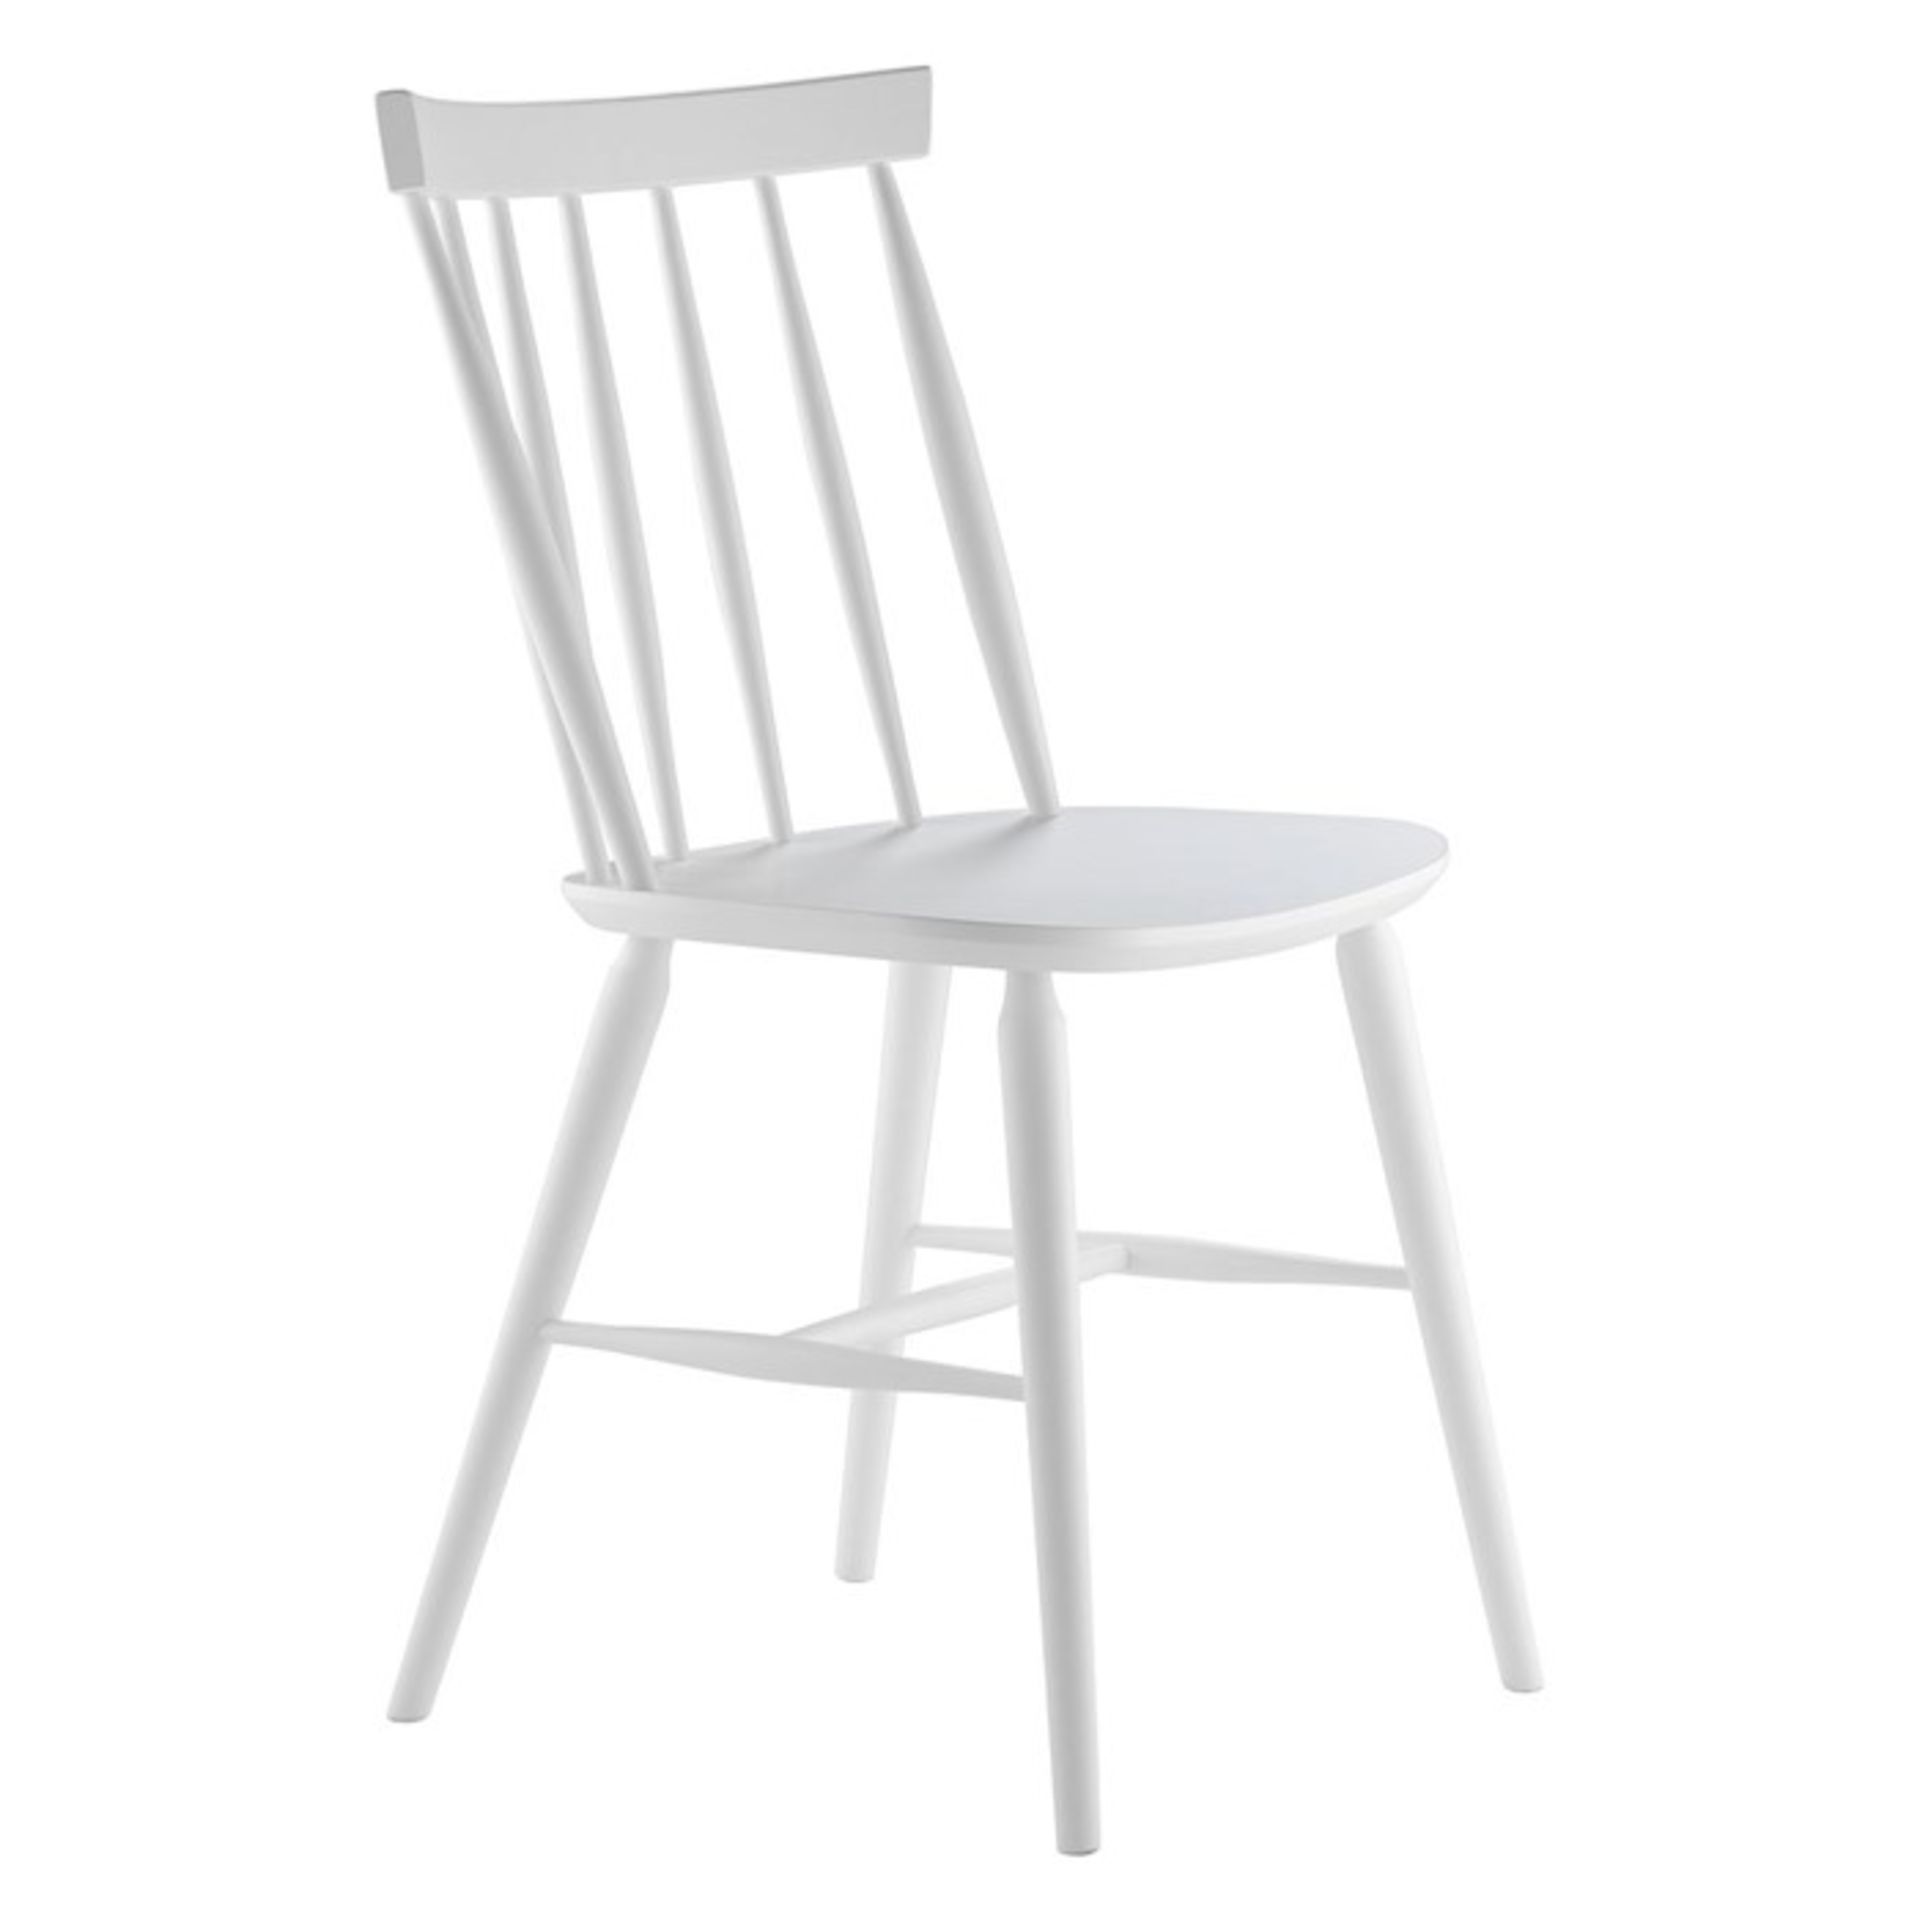 1 GRADE B SET OF 2 TALIA DINING CHAIRS IN WHITE / 77003 / RRP £95.00 (VIEWING HIGHLY RECOMMENDED)